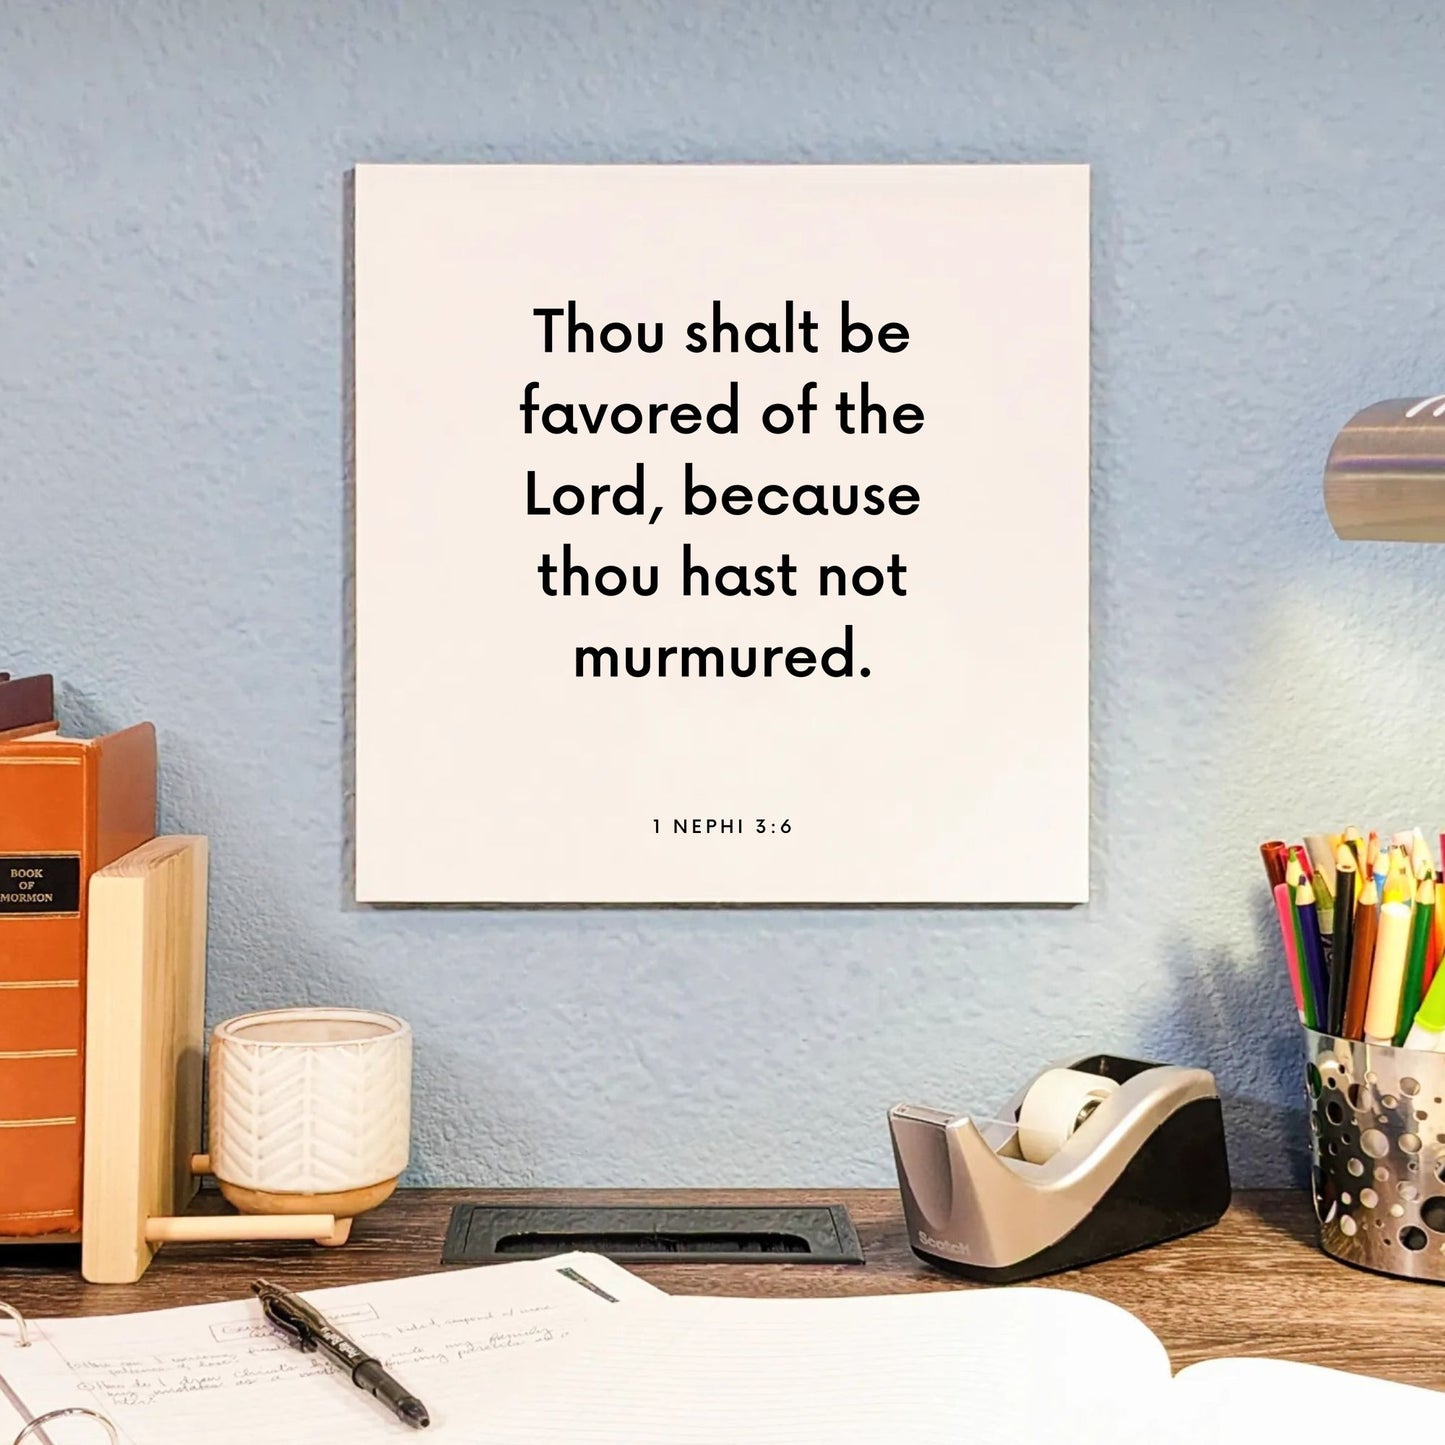 Desk mouting of the scripture tile for 1 Nephi 3:6 - "Thou shalt be favored of the Lord"